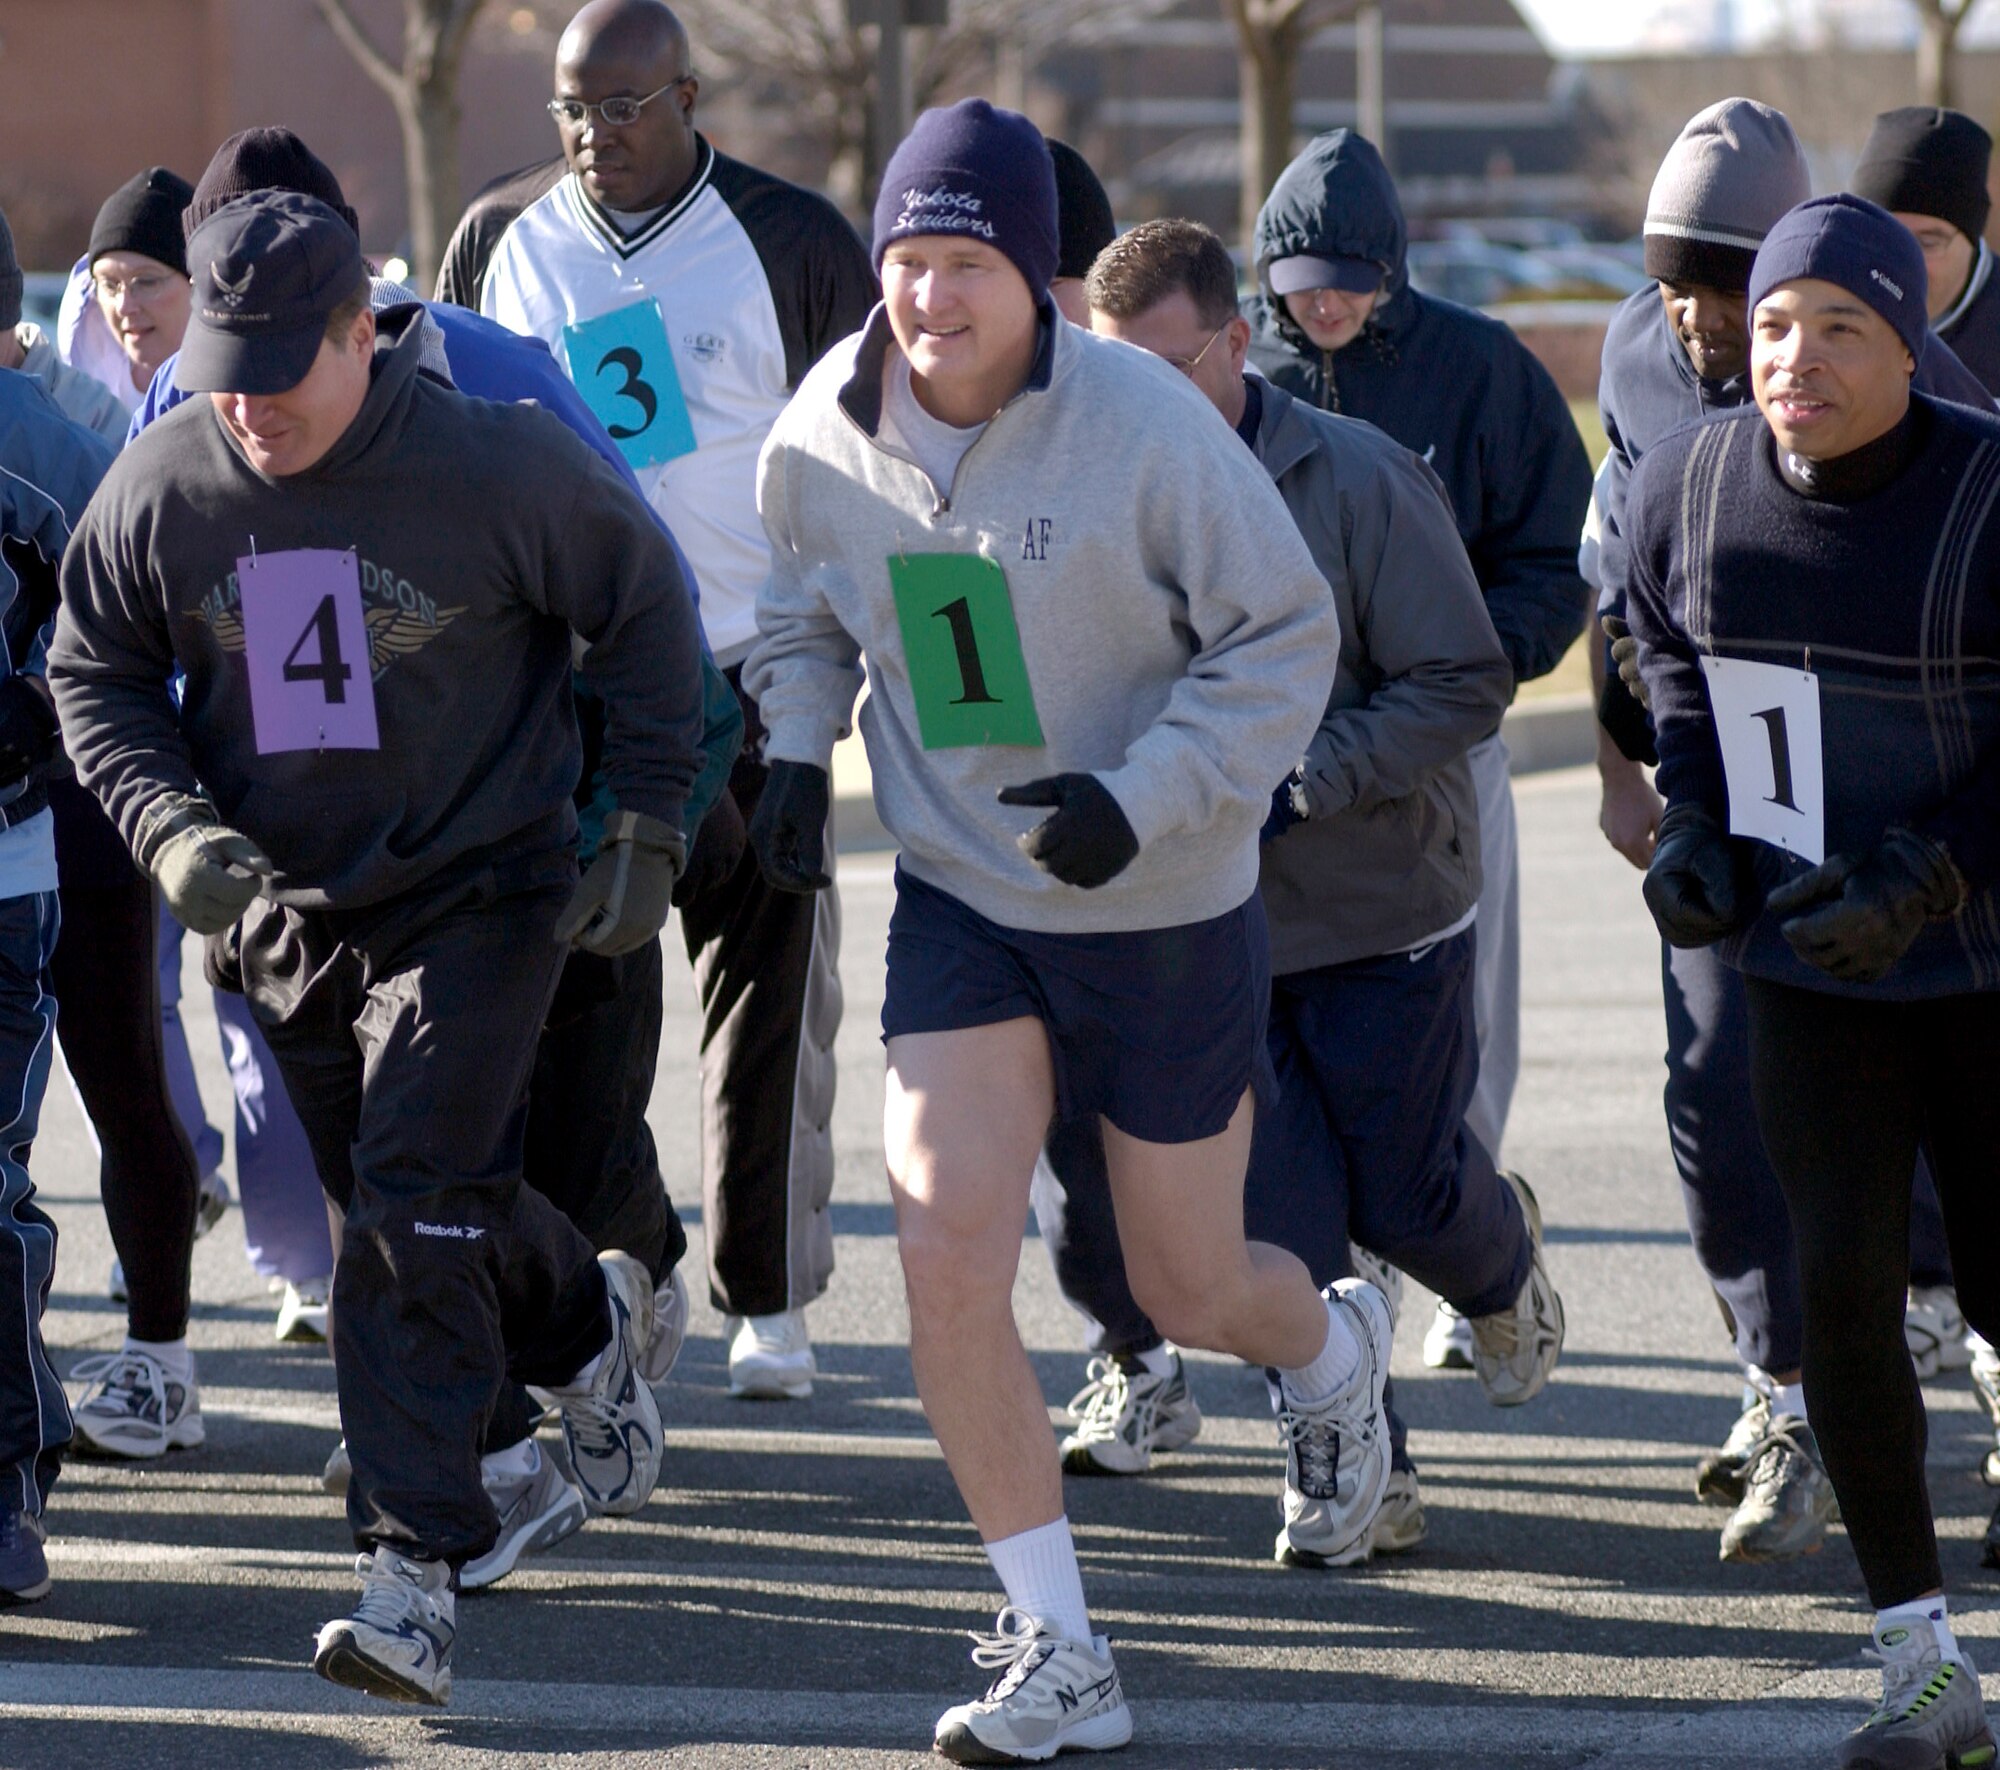 BOLLING AIR FORCE BASE, D.C. (AFPN) -- Chief Master Sgt. of the Air Force Gerald R. Murray (center) starts the 1.5-mile run for his fitness evaluation Jan. 7, More than 40 Air Force chief master sergeants from throughout the National Capitol Region braved bitter cold weather to join Chief Murray as he led the way in helping Air Force Chief of Staff Gen. John P. Jumper officially launch the new Air Force fitness standard.  (U.S. Air Force photo by Master Sgt. Jim Varhegyi)